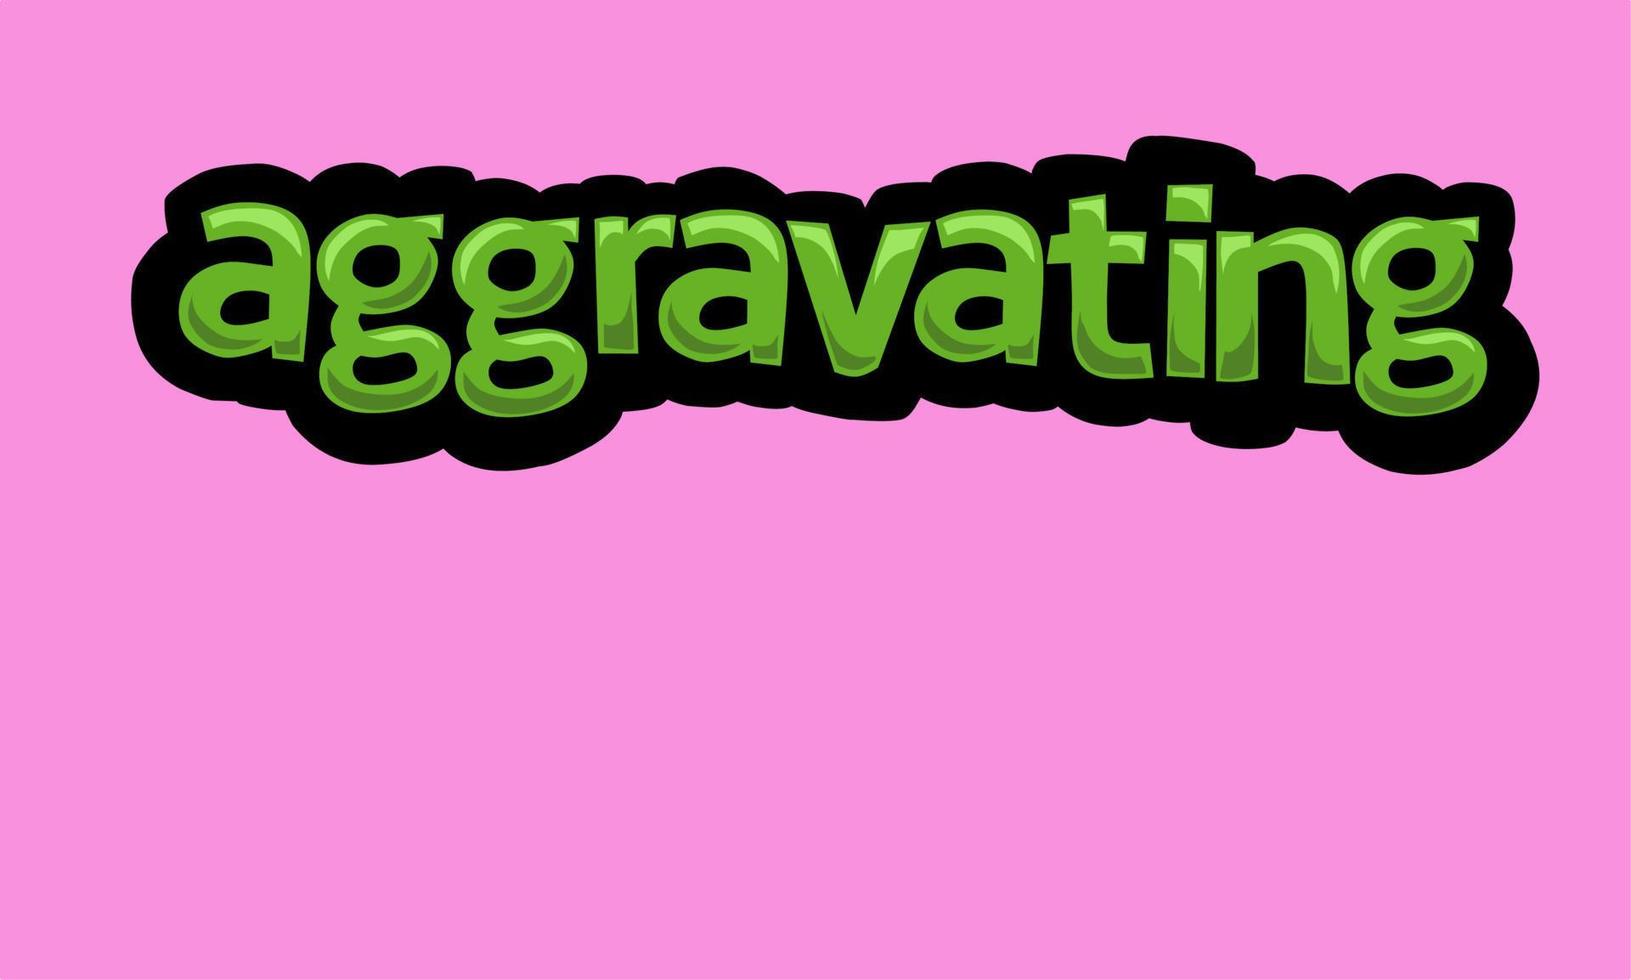 AGGRAVATING writing vector design on a pink background